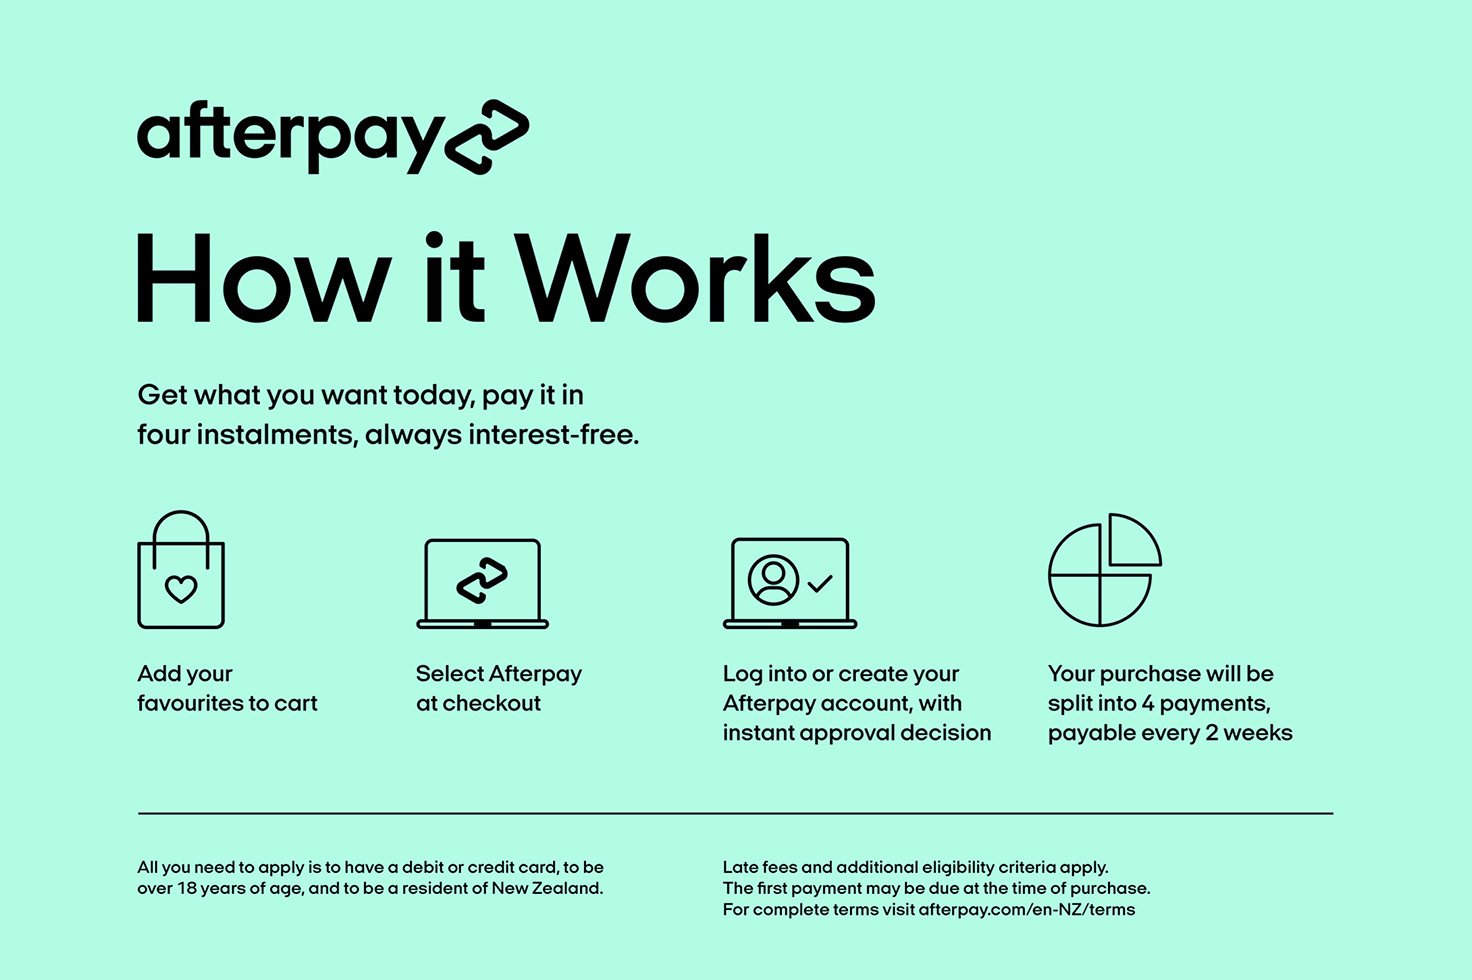 Afterpay - How It Works